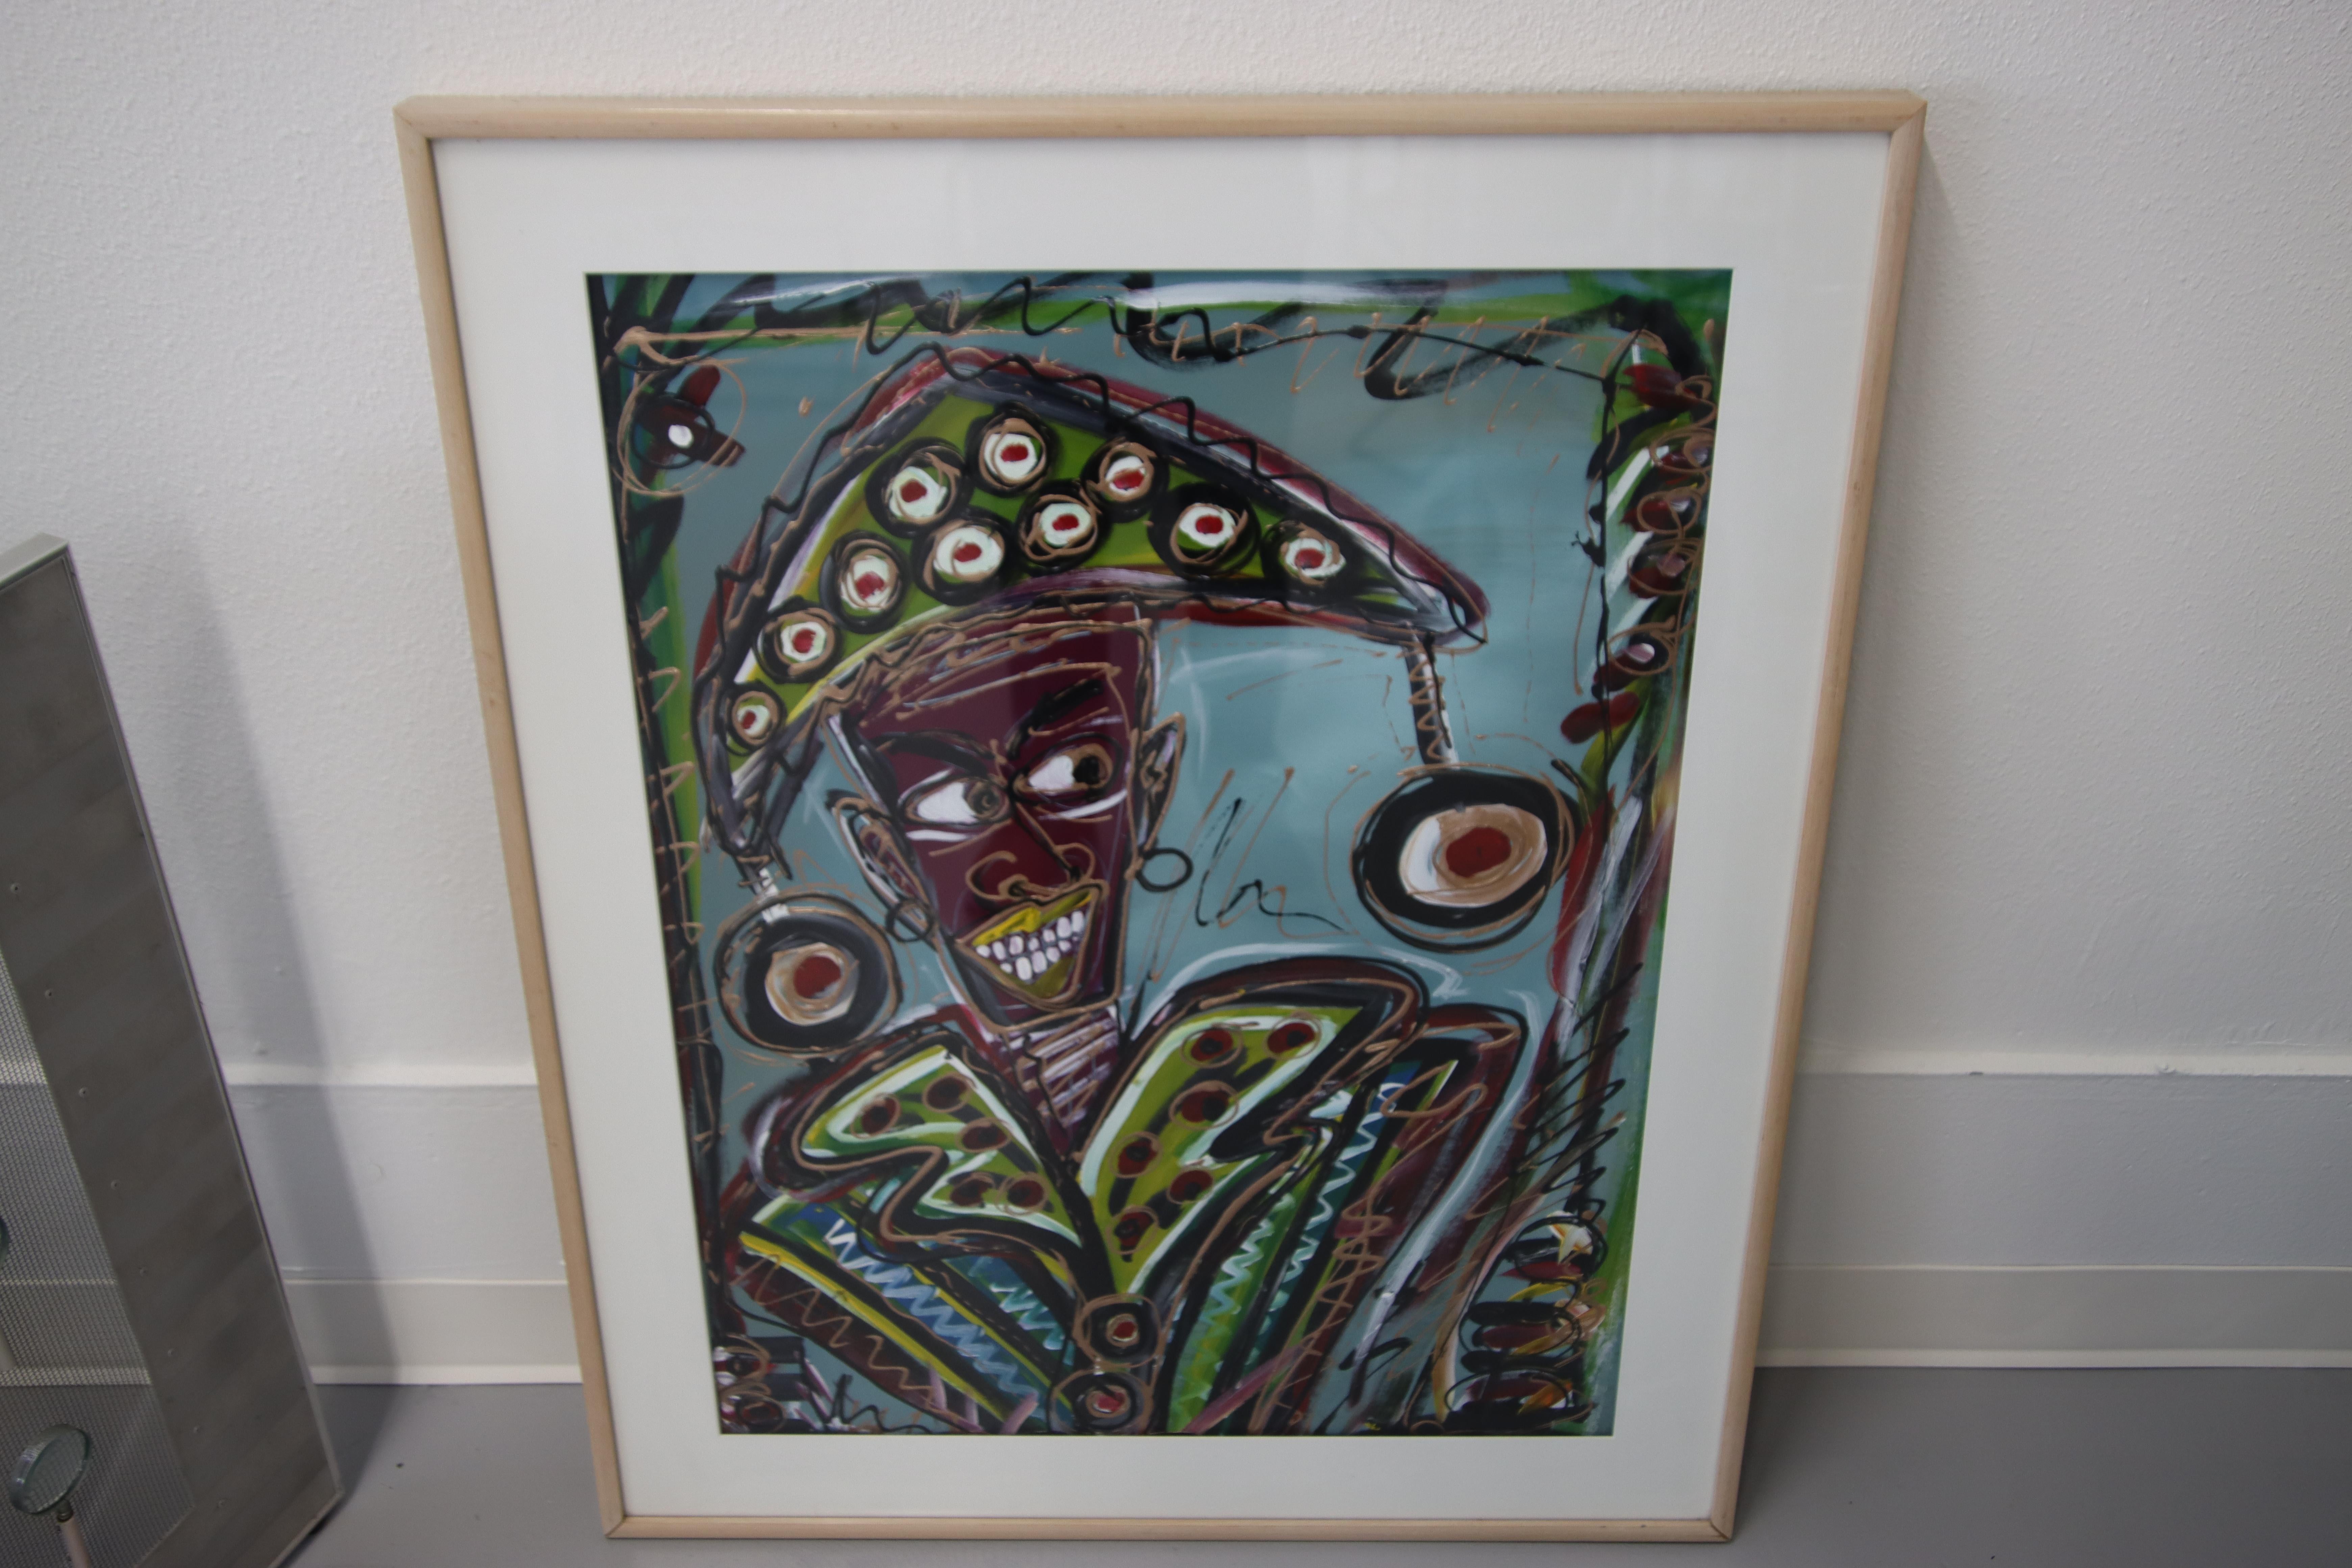 A great painting of a jester signed Juan Alonso 1992. It is titled verso 